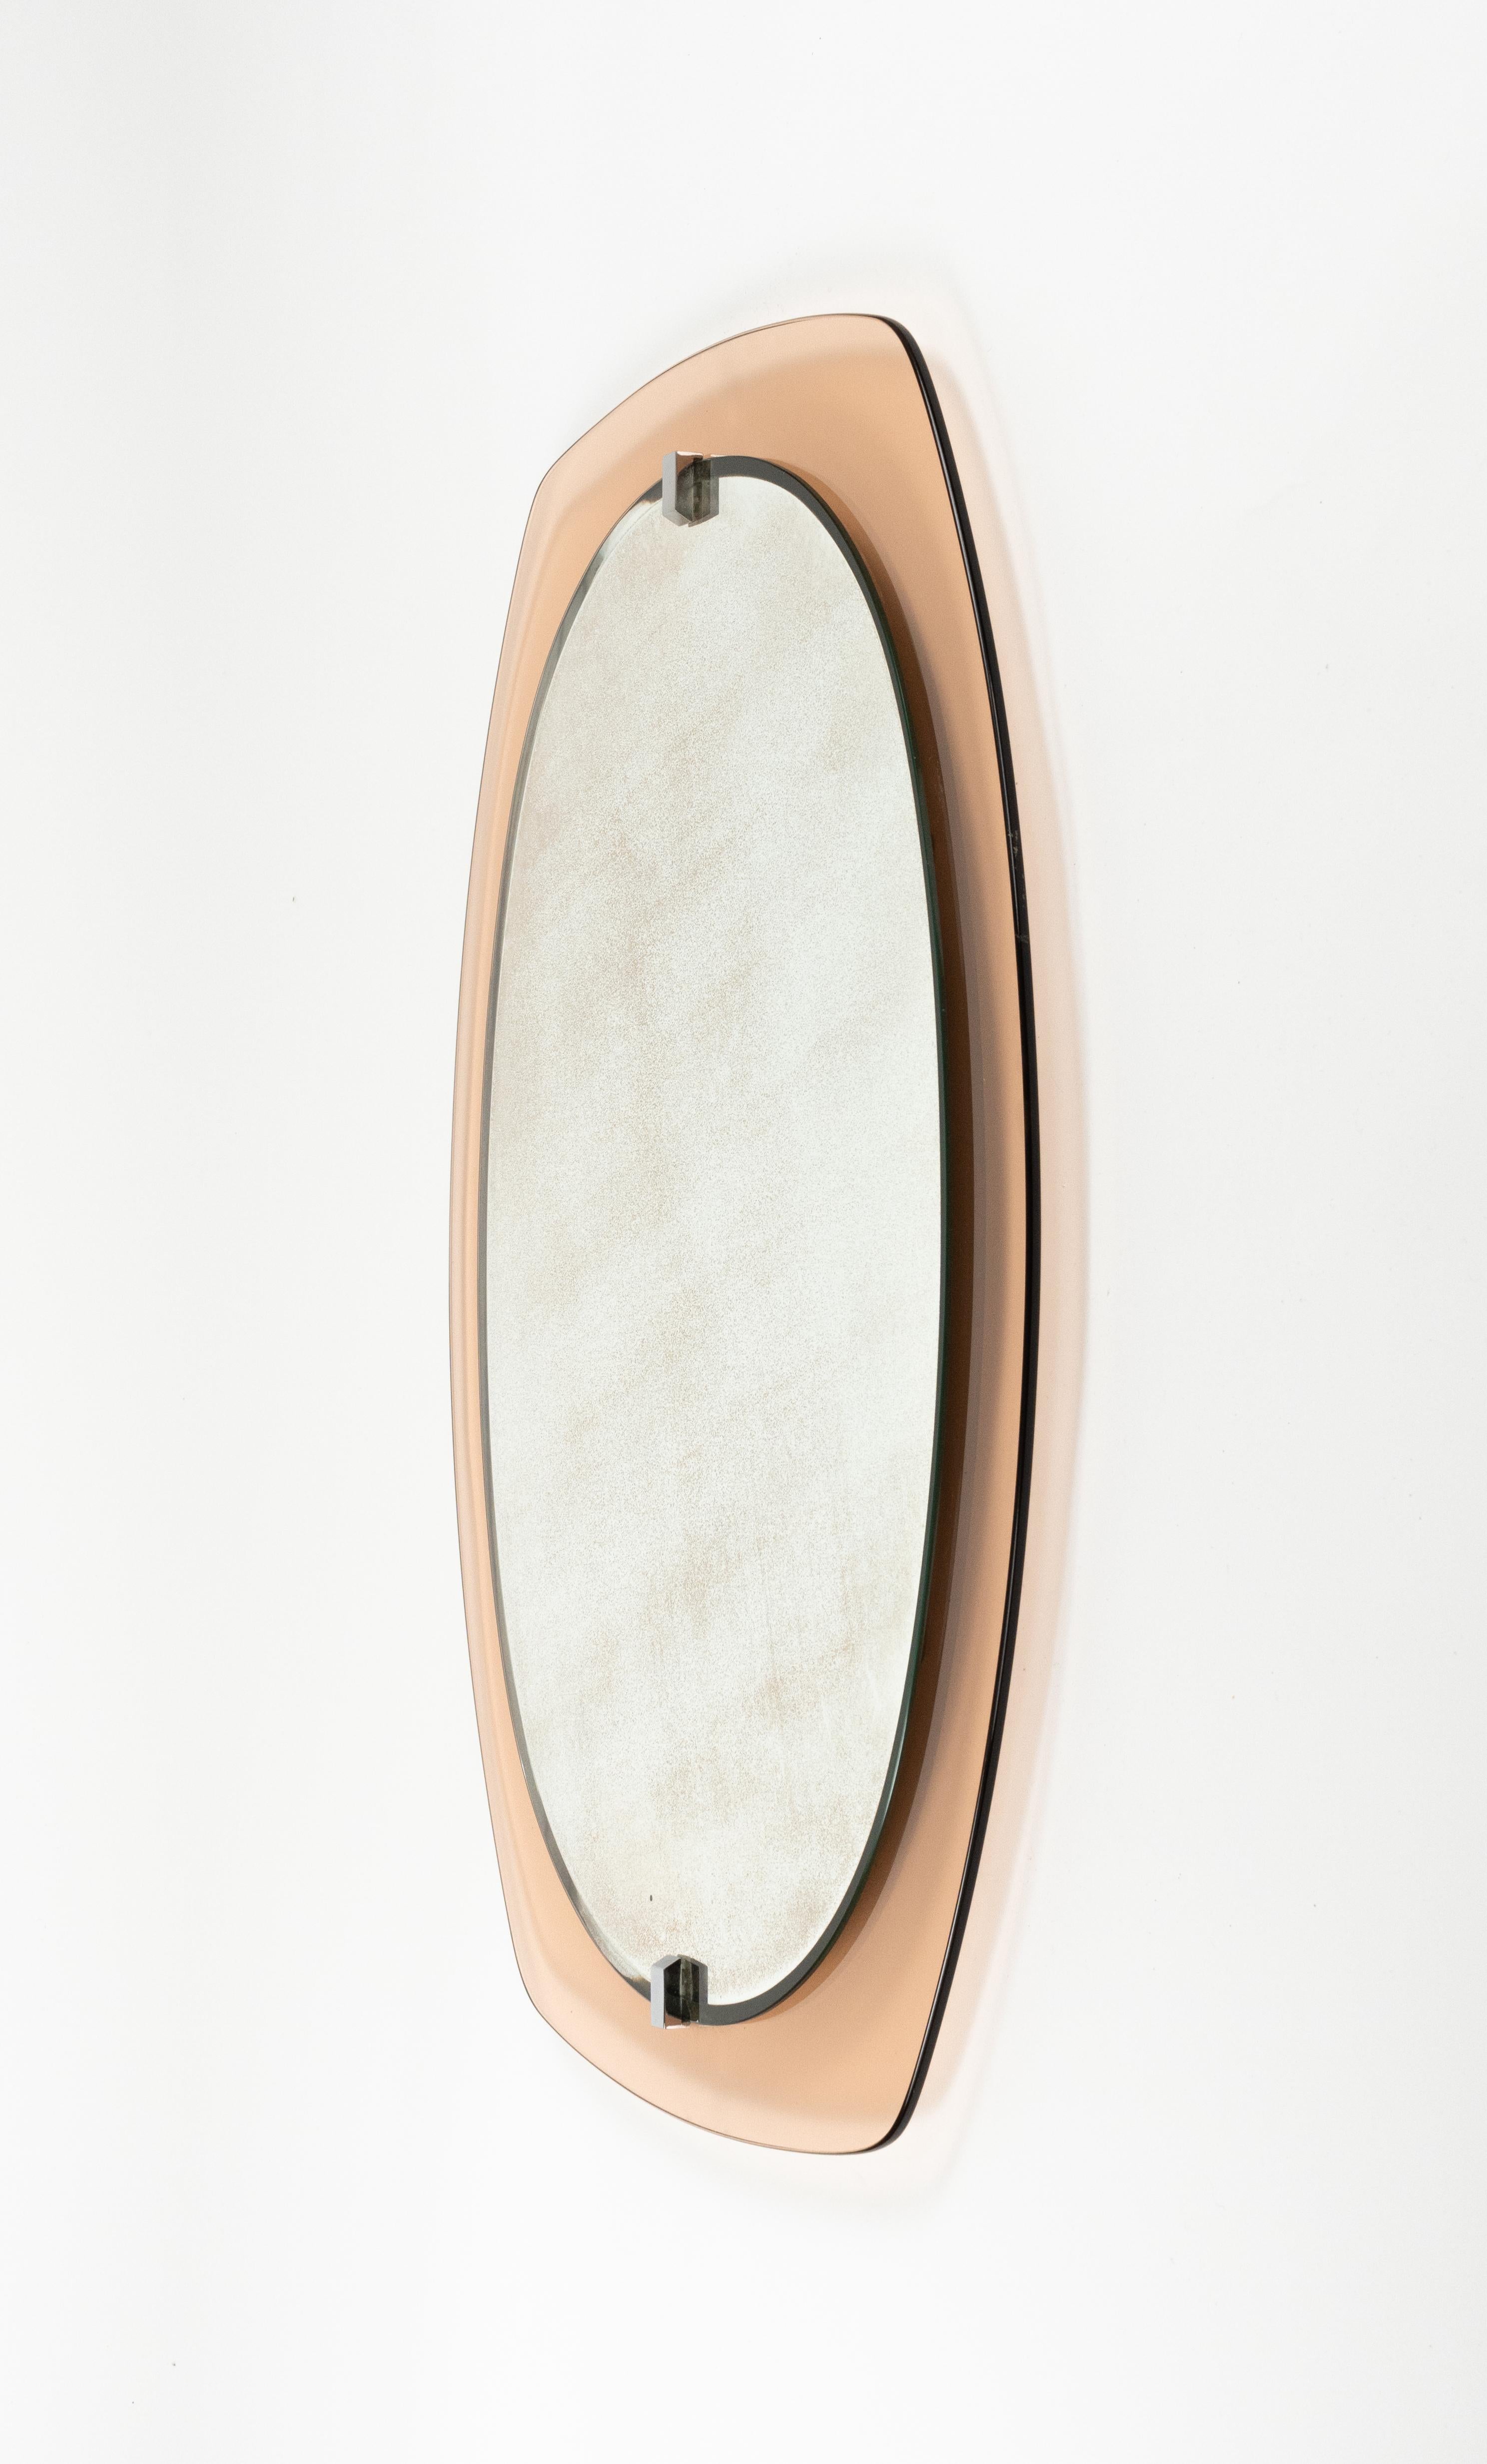 Midcentury Glass Pink Oval Wall Mirror by Veca, Italy 1970s For Sale 5